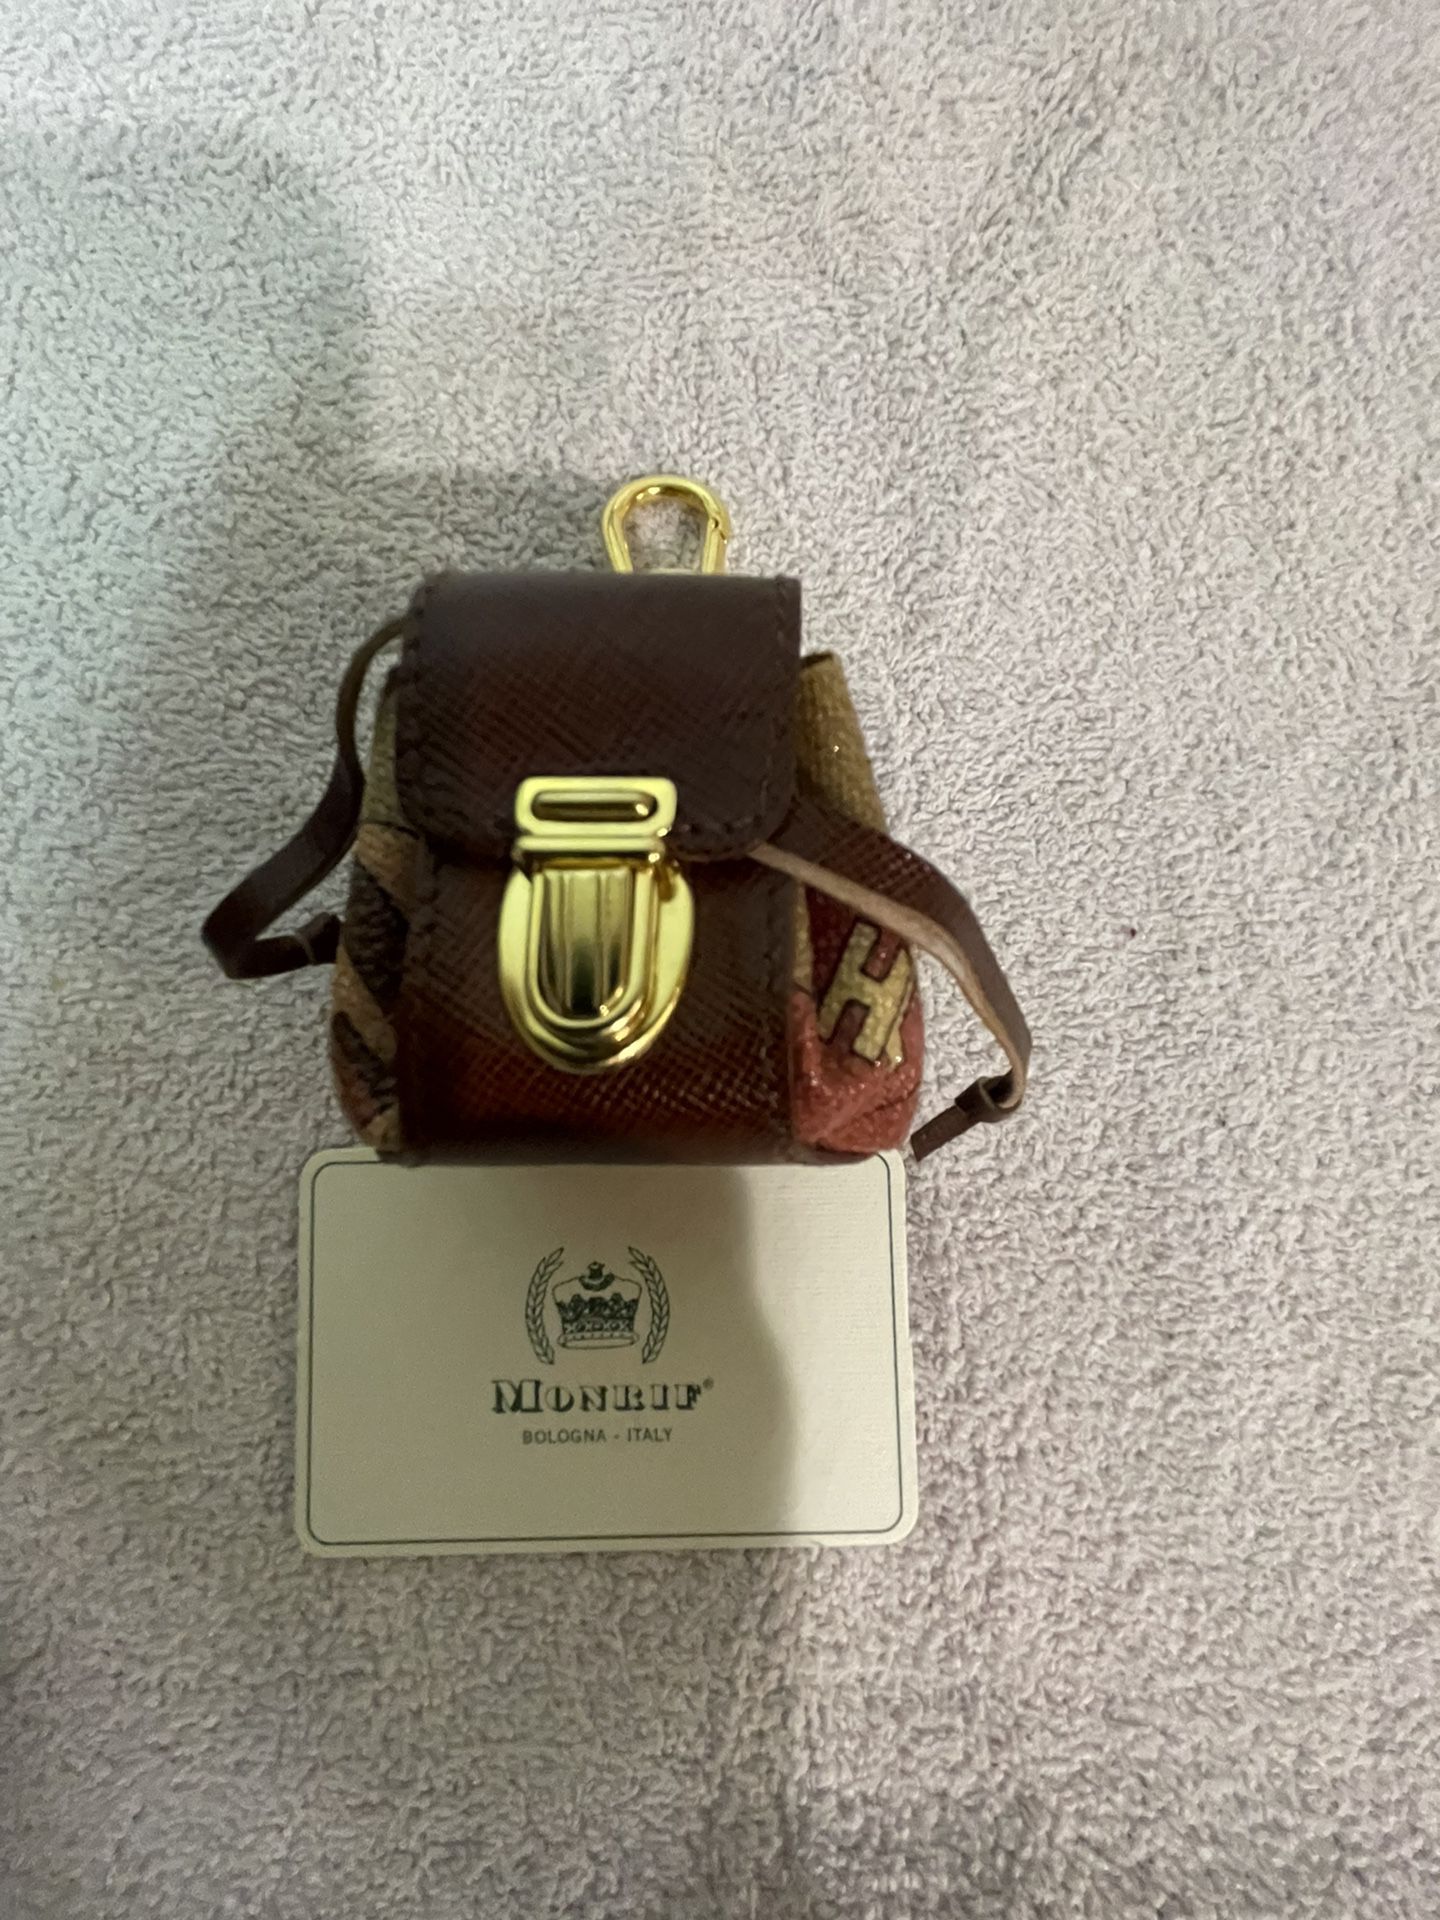 3011-HITT Monogram PU Leather Tag Key Holder and Bag Charm NWT Box, & Dust  Bag for Sale in Gallatin, TN - OfferUp